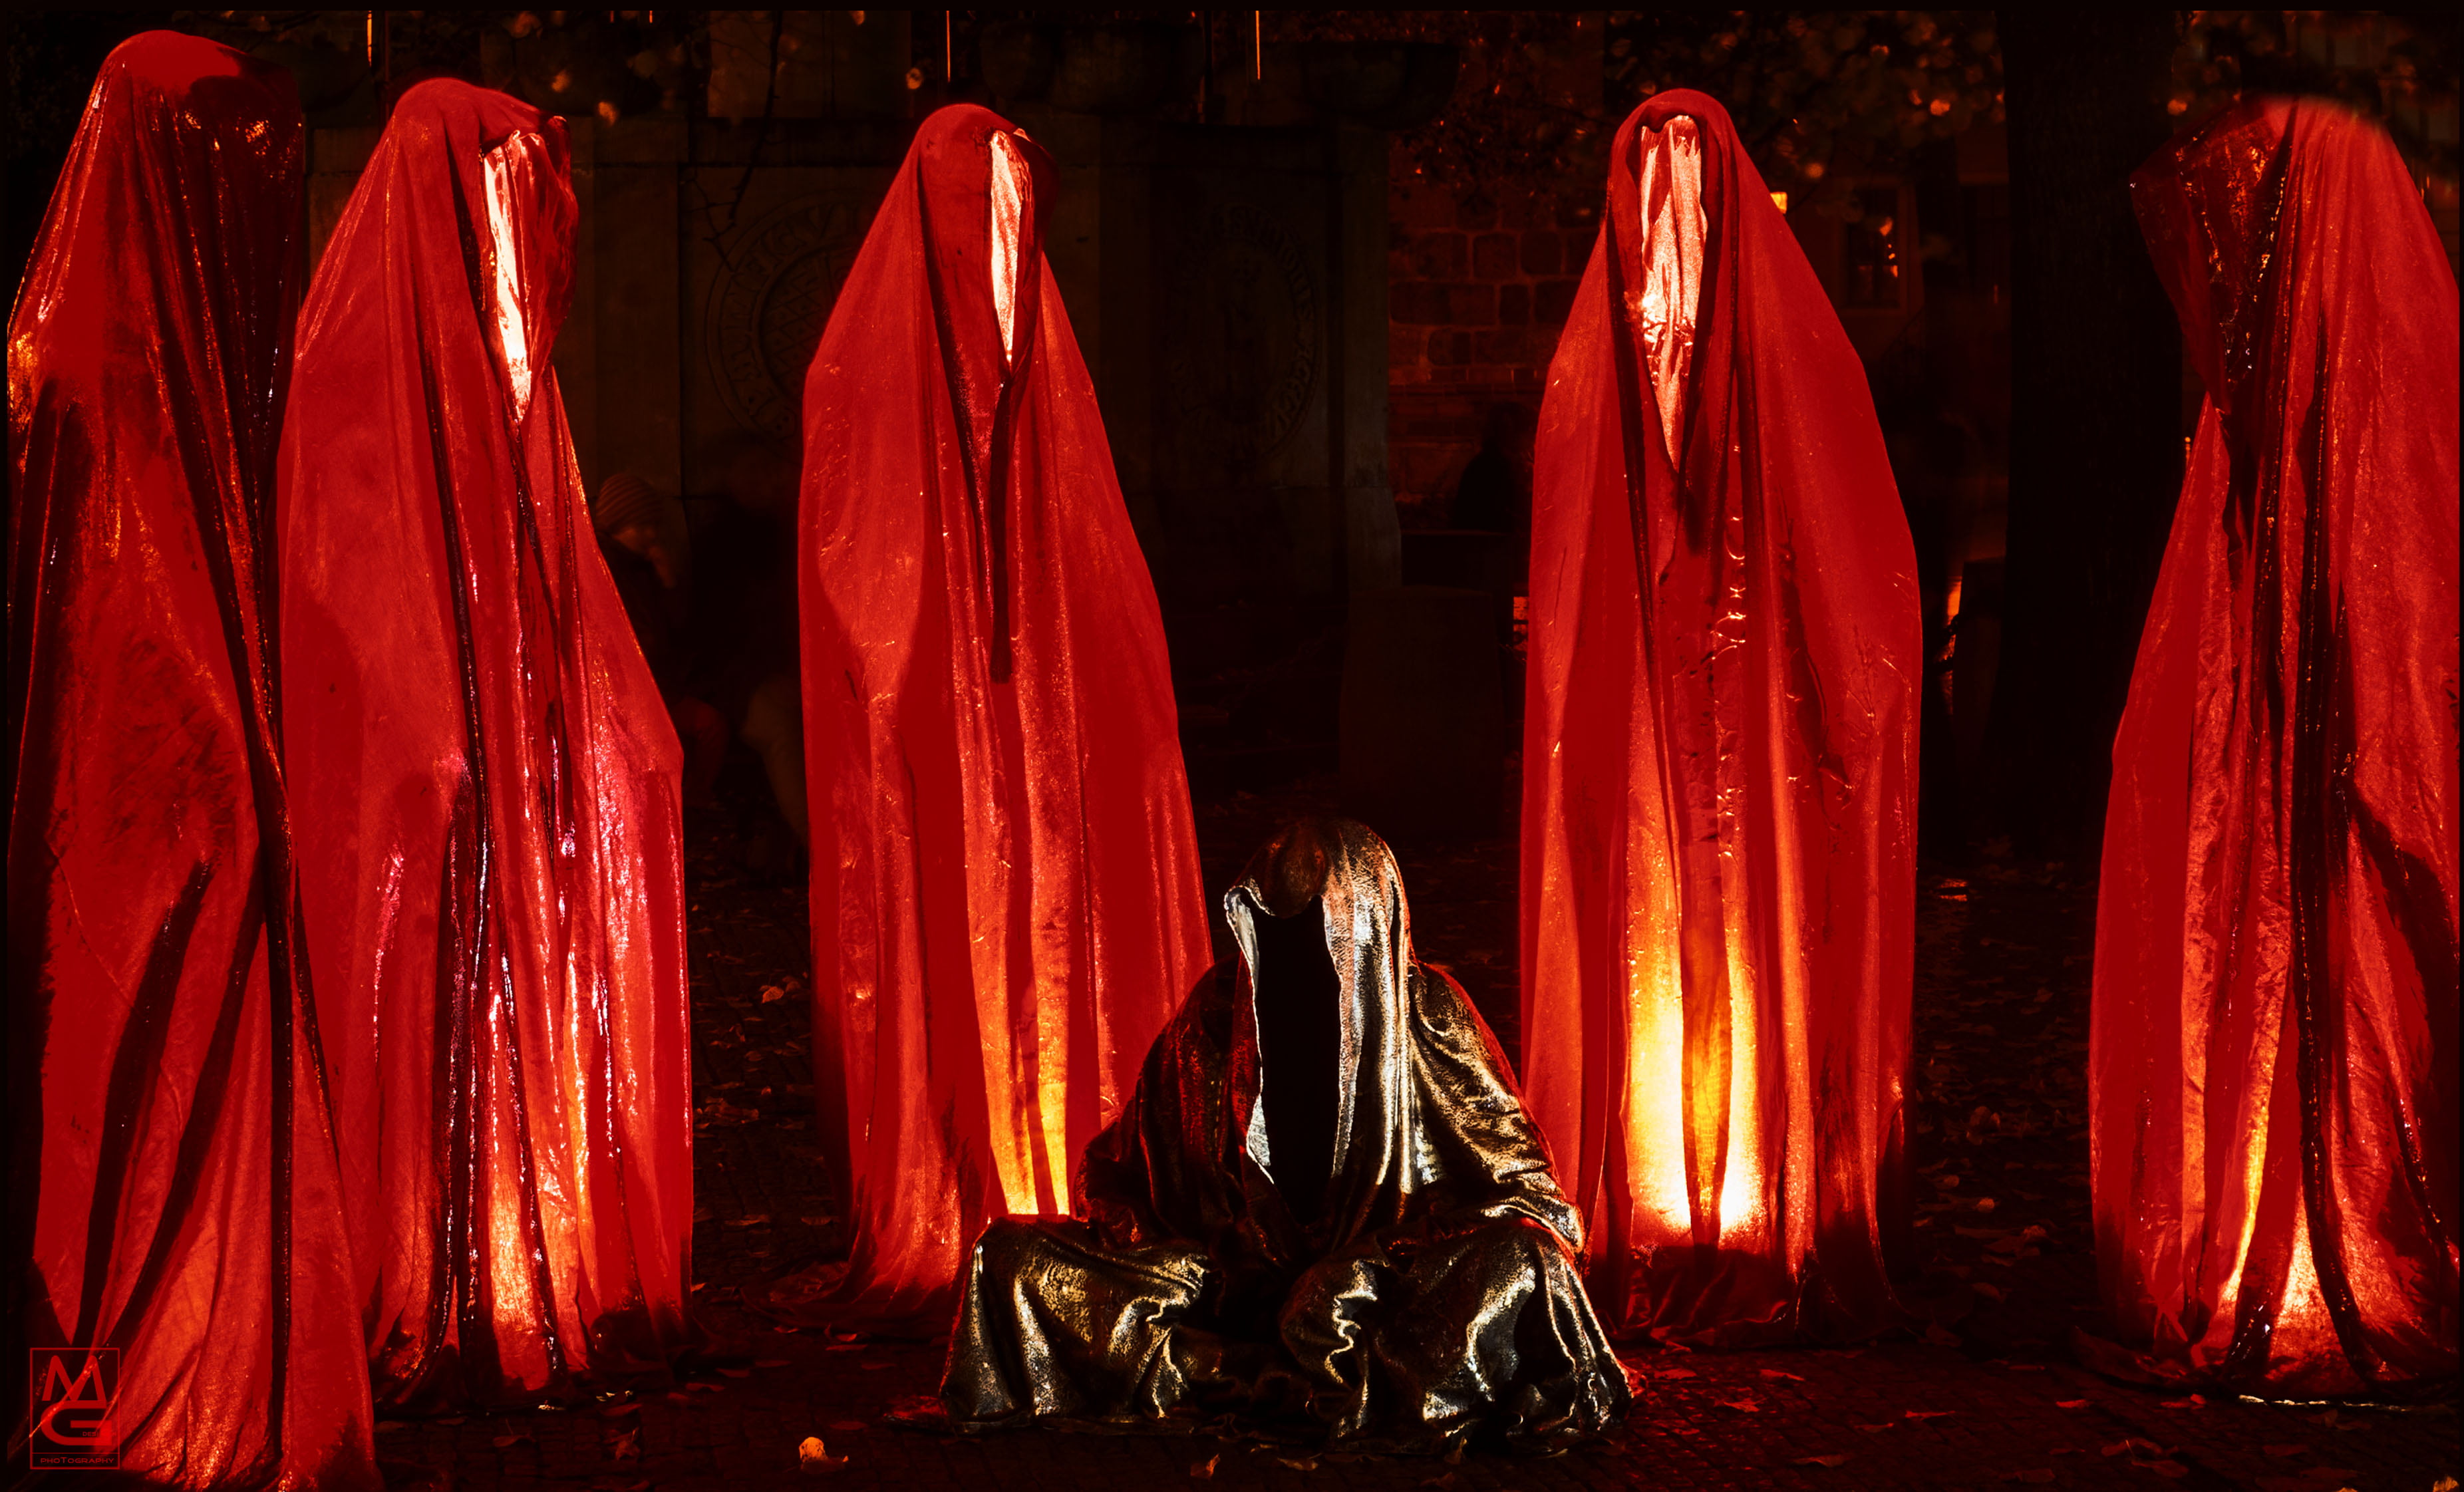 keepers of time, mantles, monks, festival of light, red, real people